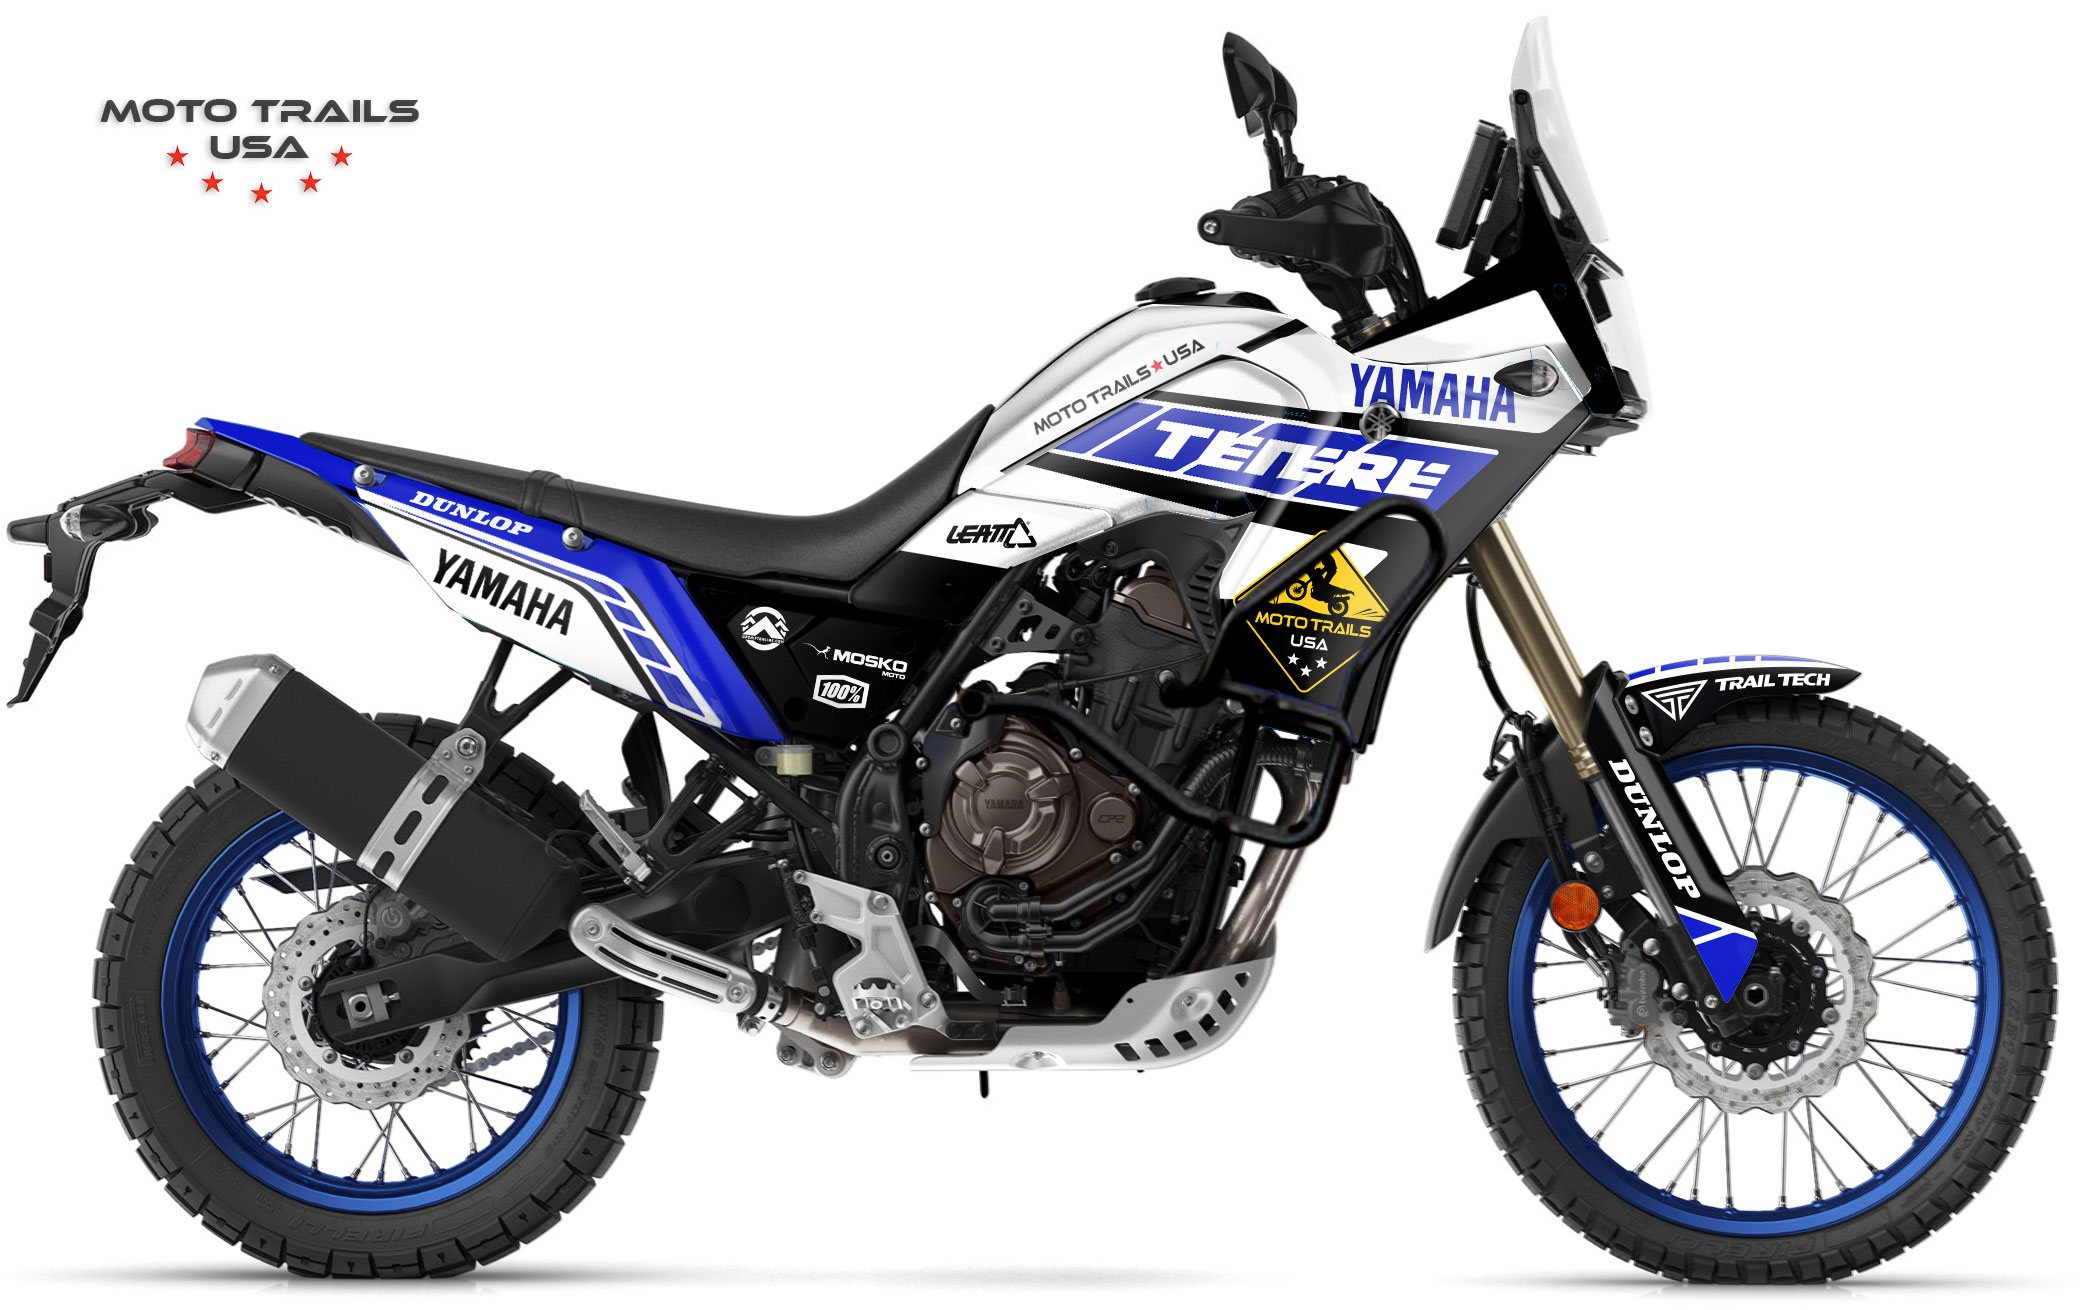 BLUE Graphic Kit Yamaha Tenere 700 “Continental Divide”  Moto Trails USA  motorcycle tours in the USA - Yamaha Tenere 700 - Continental Divide